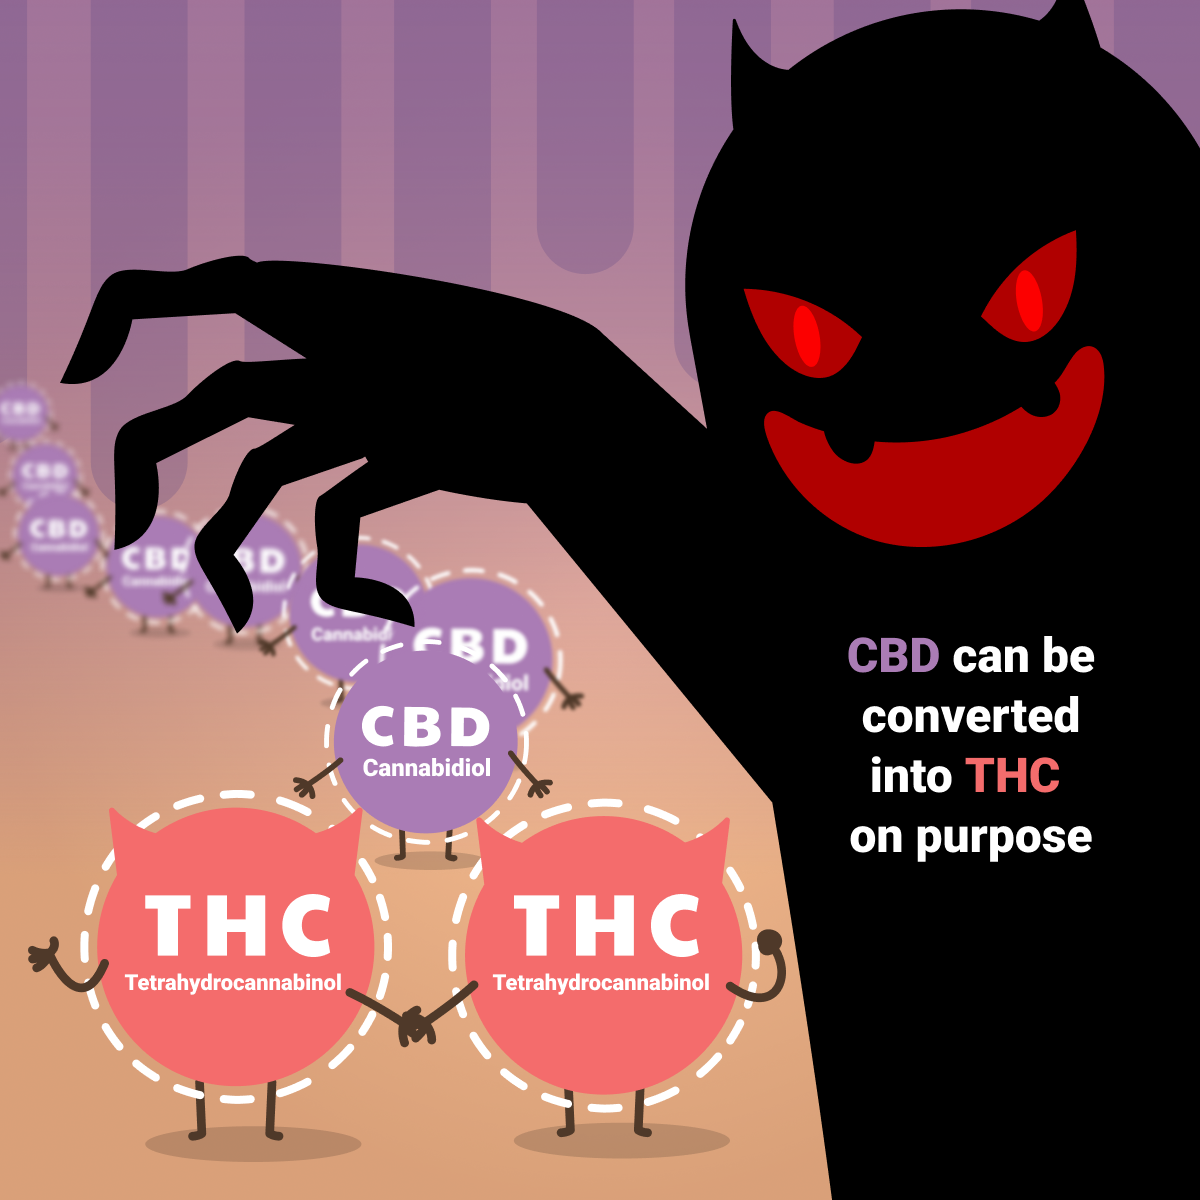 CBD can be converted into THC on purpose